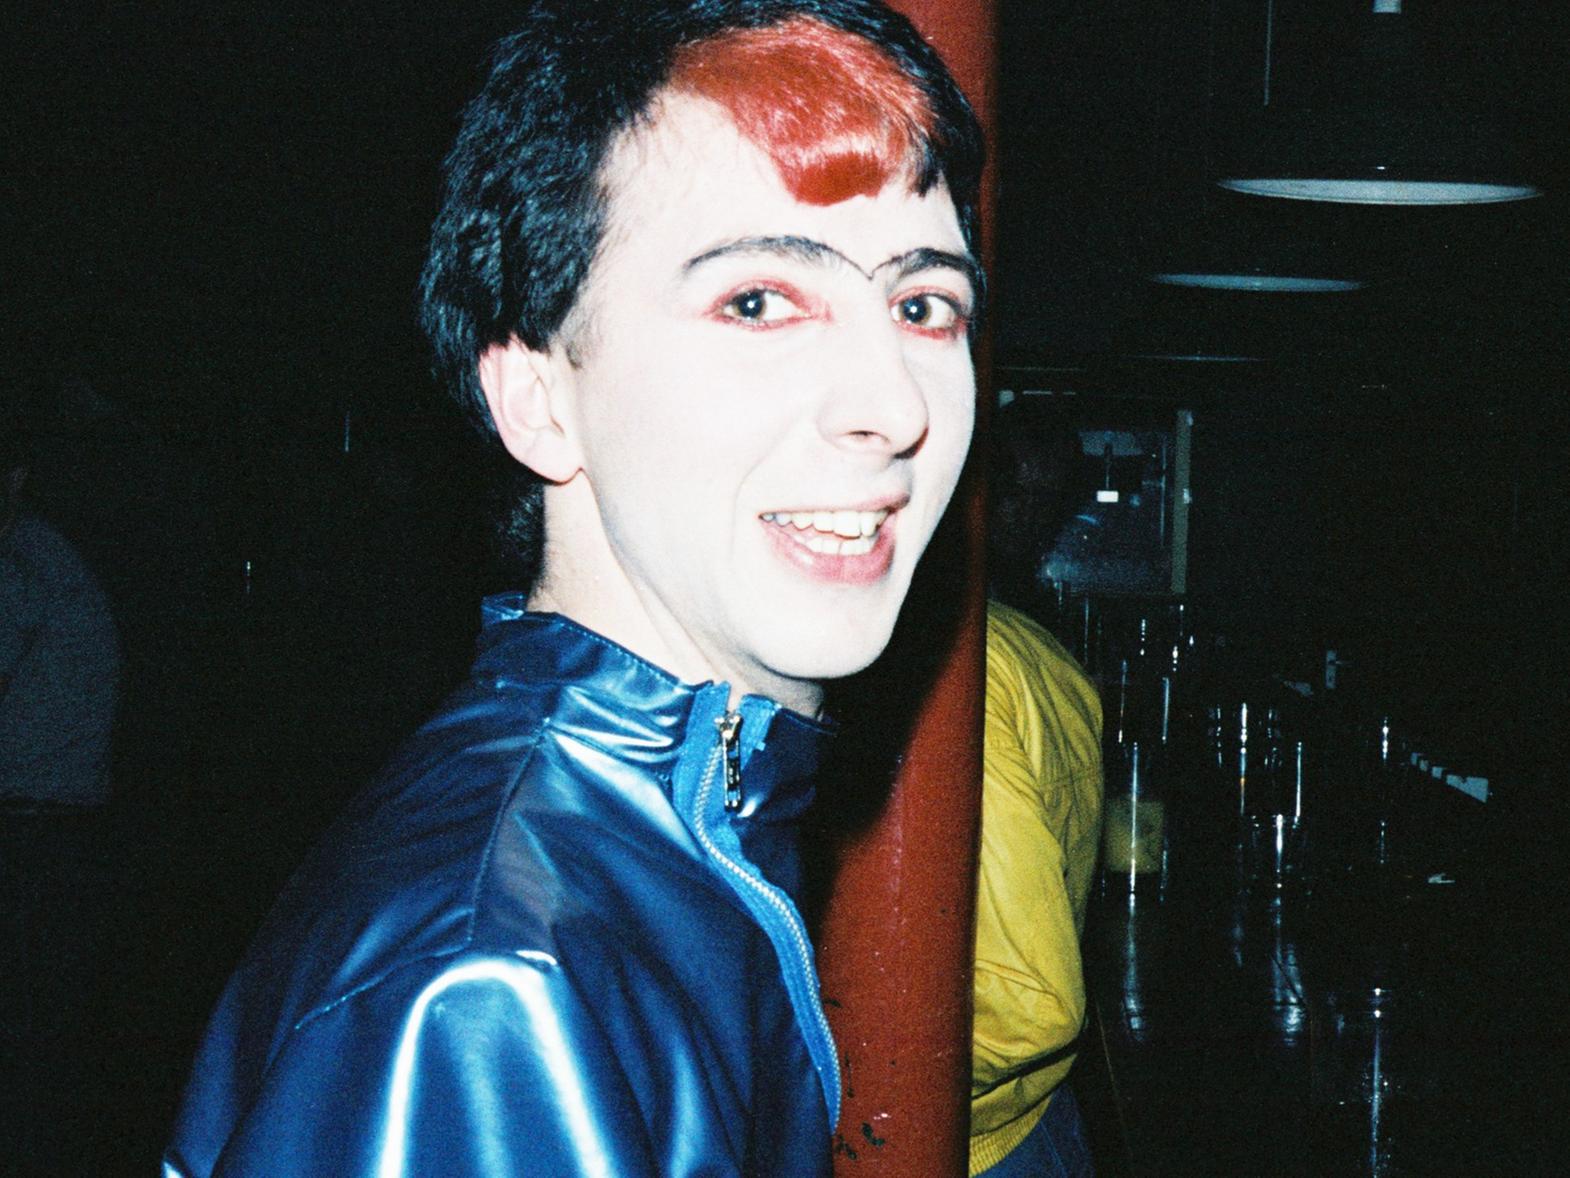 Mike said: "Marc Almond was our cloakroom girl - I used to help him put on his make-up!"